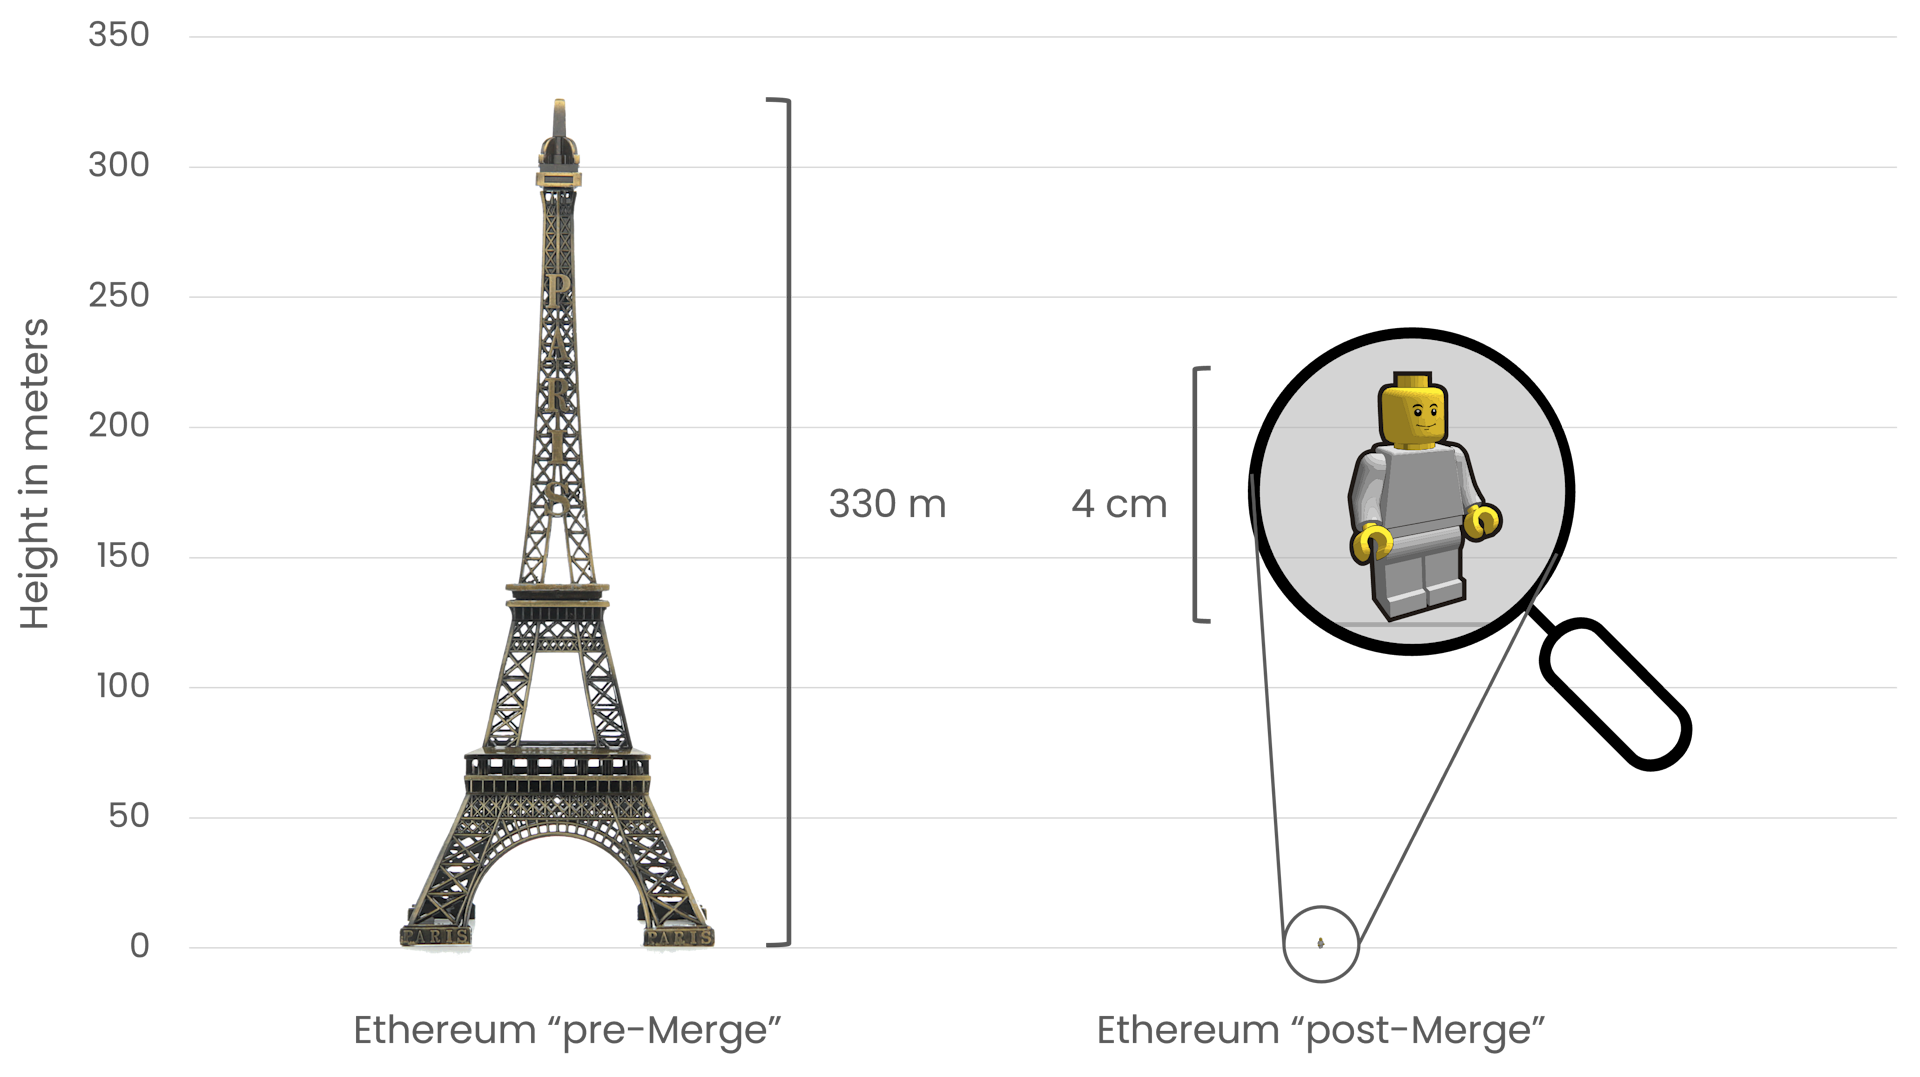 Comparing Ethereum's energy consumption pre- and post-Merge, using the Eiffel Tower (330 meters tall) on the left to symbolize the high energy consumption before The Merge, and a small 4 cm tall Lego figure on the right to represent the dramatic reduction in energy usage after The Merge